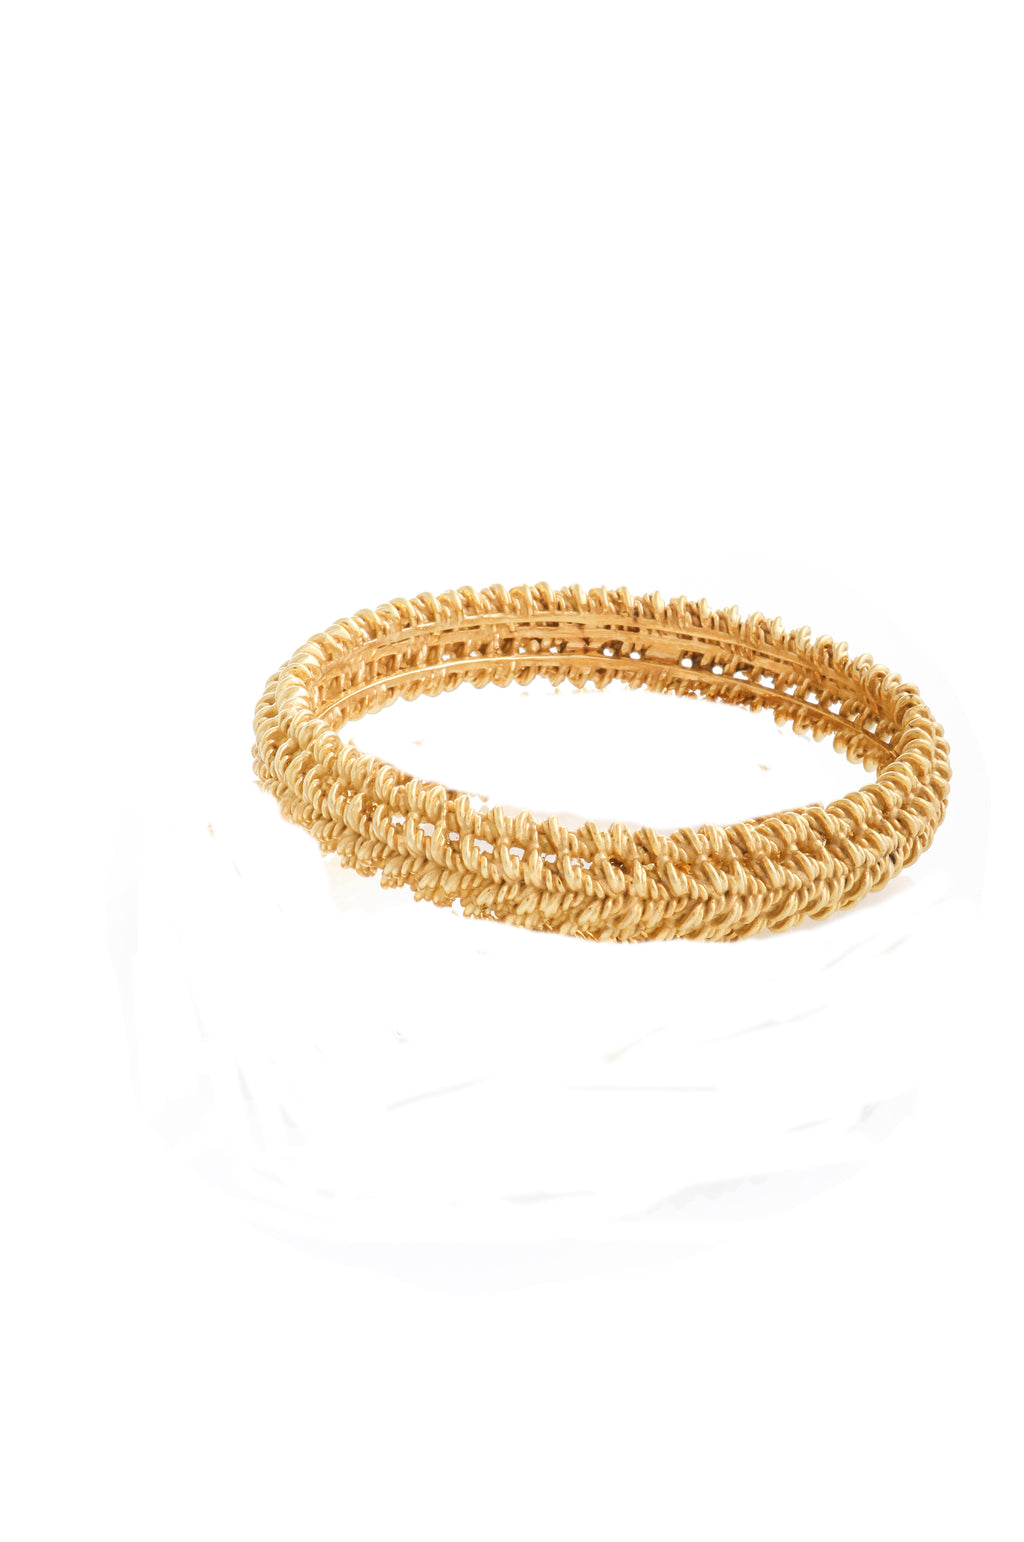 GOLD PLATED TWISTED WIRE BANGLE